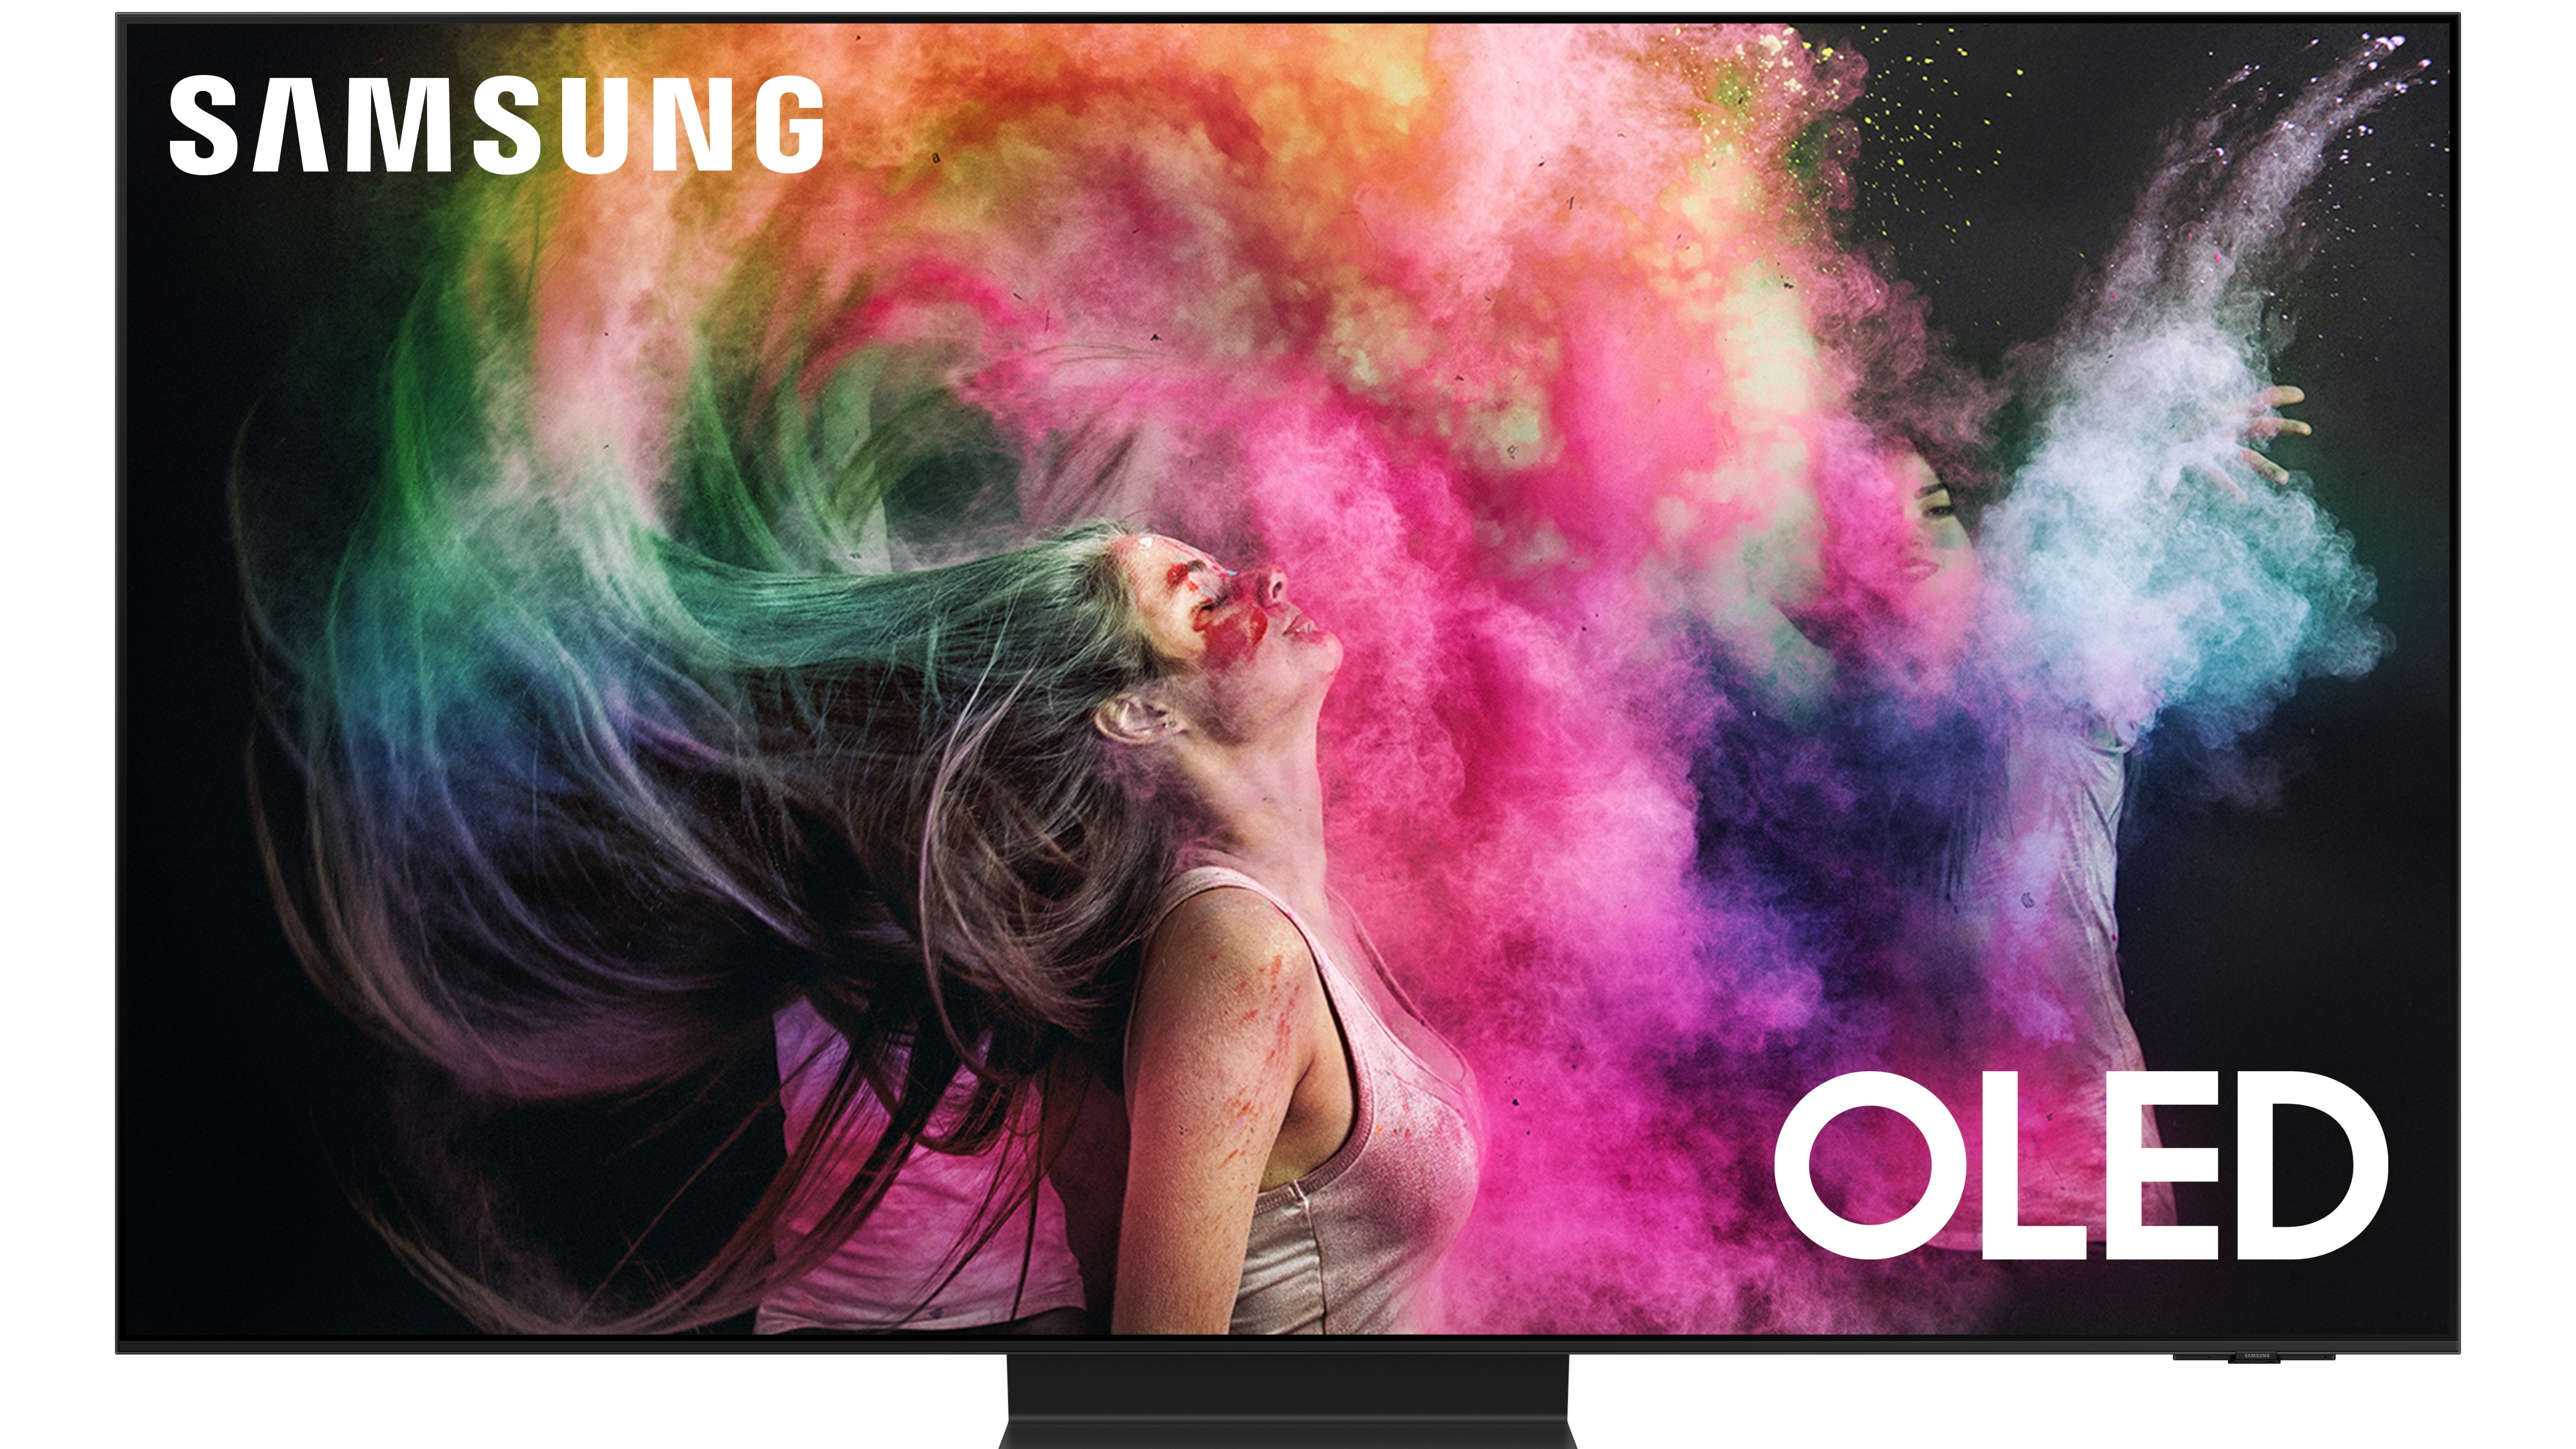 Samsung S95C OLED with colorful abstract image onscren